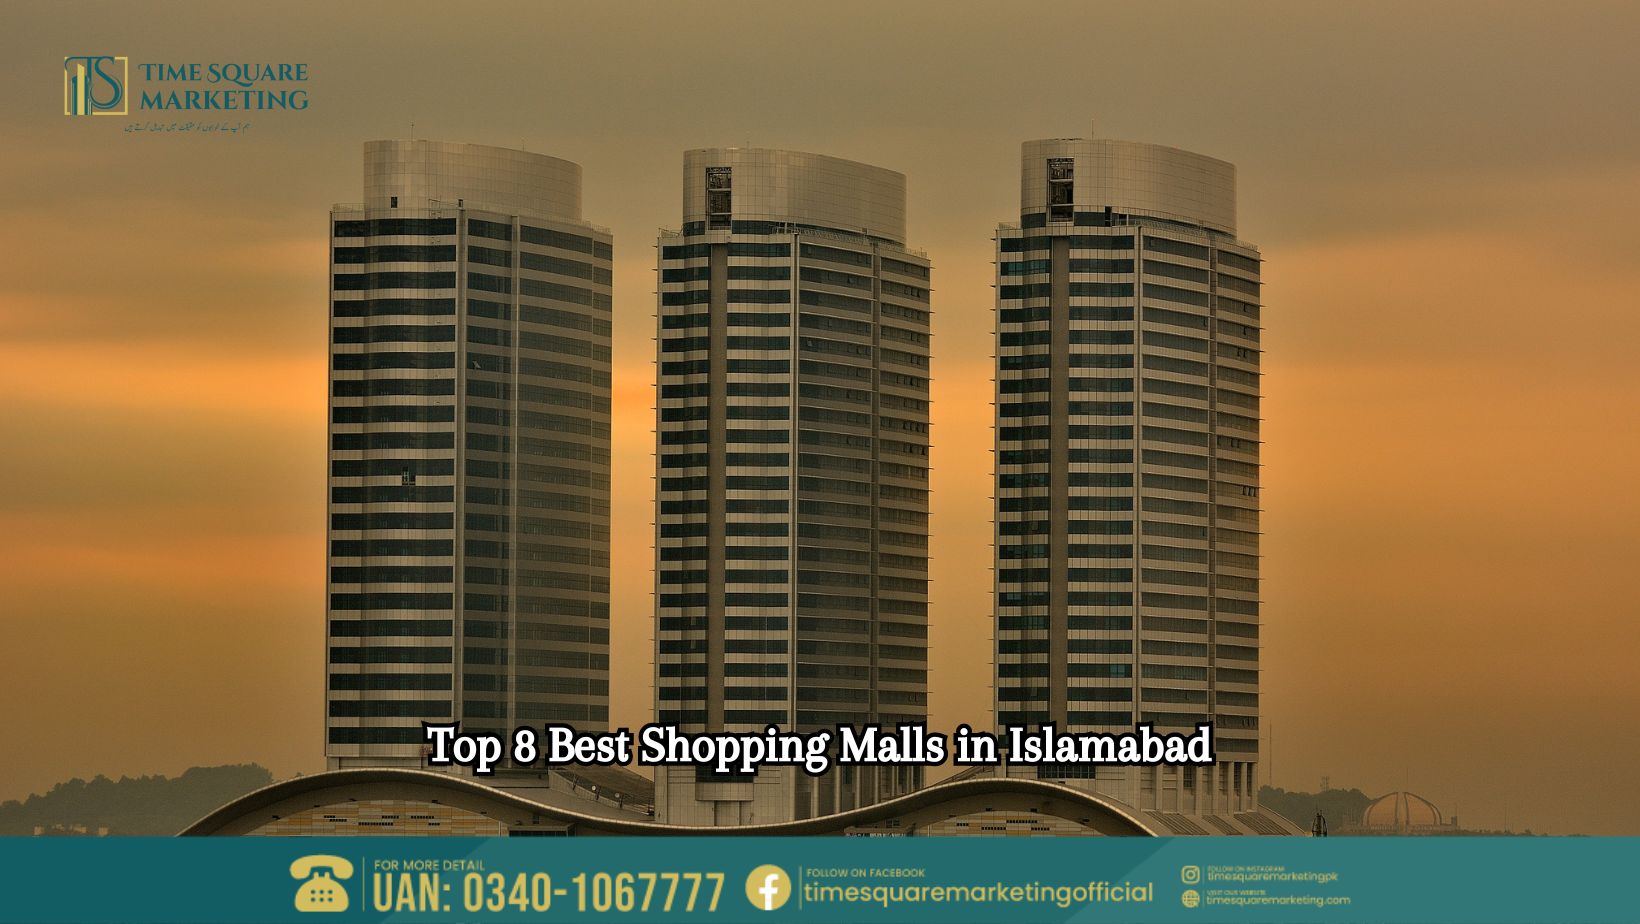 Top 8 Best Shopping Malls in Islamabad